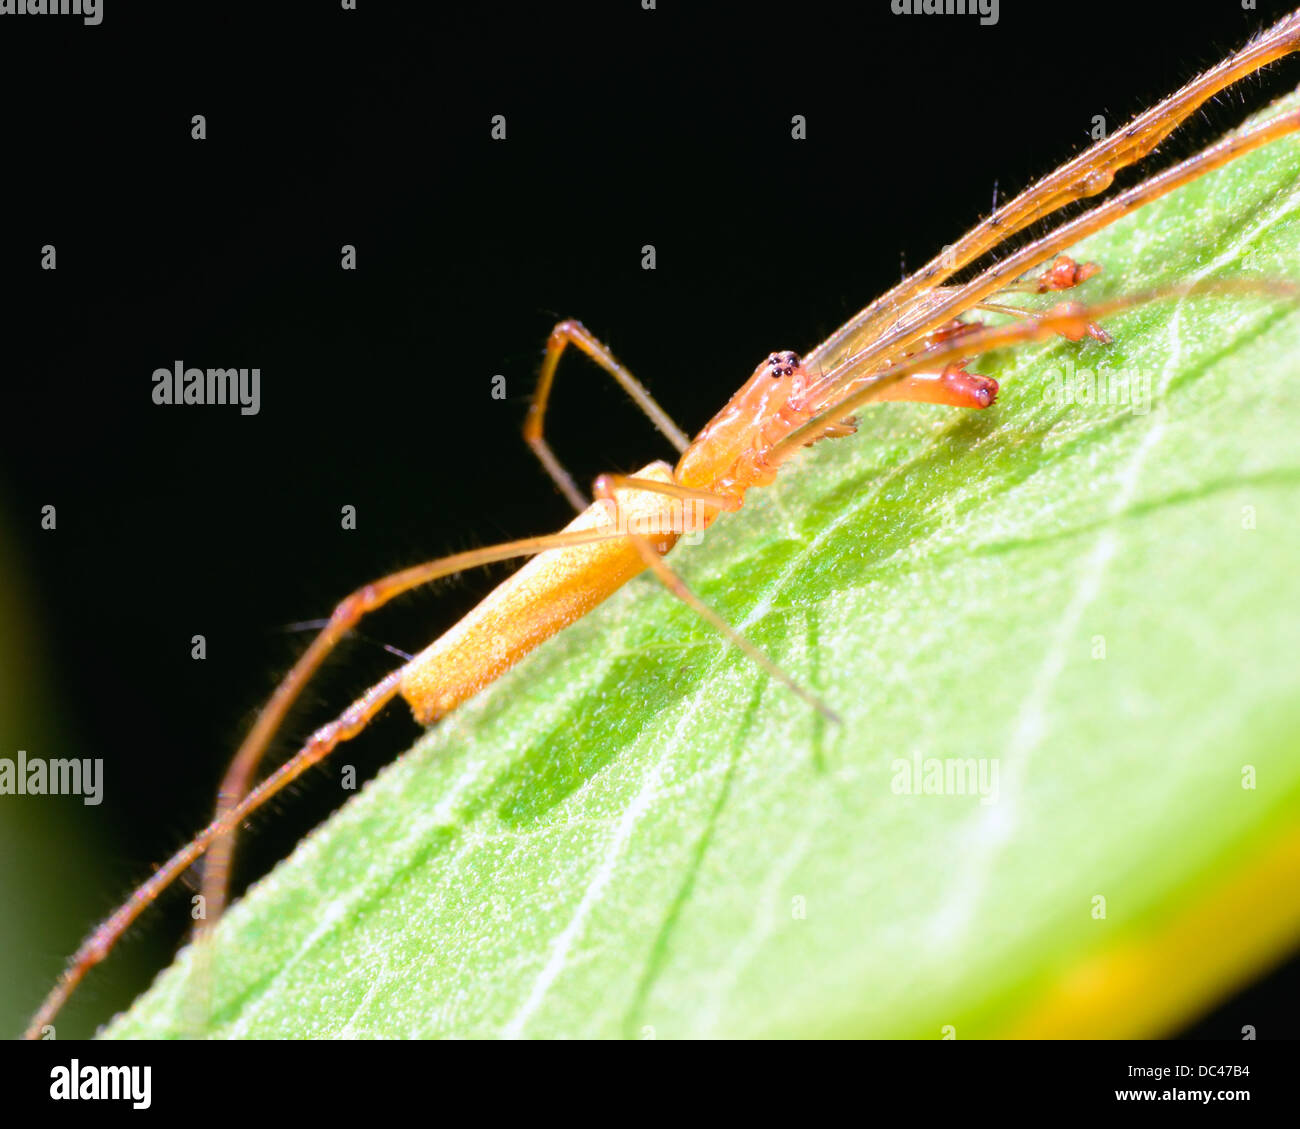 Long-jawed Orb Weaver perched on a green plant leaf. Stock Photo